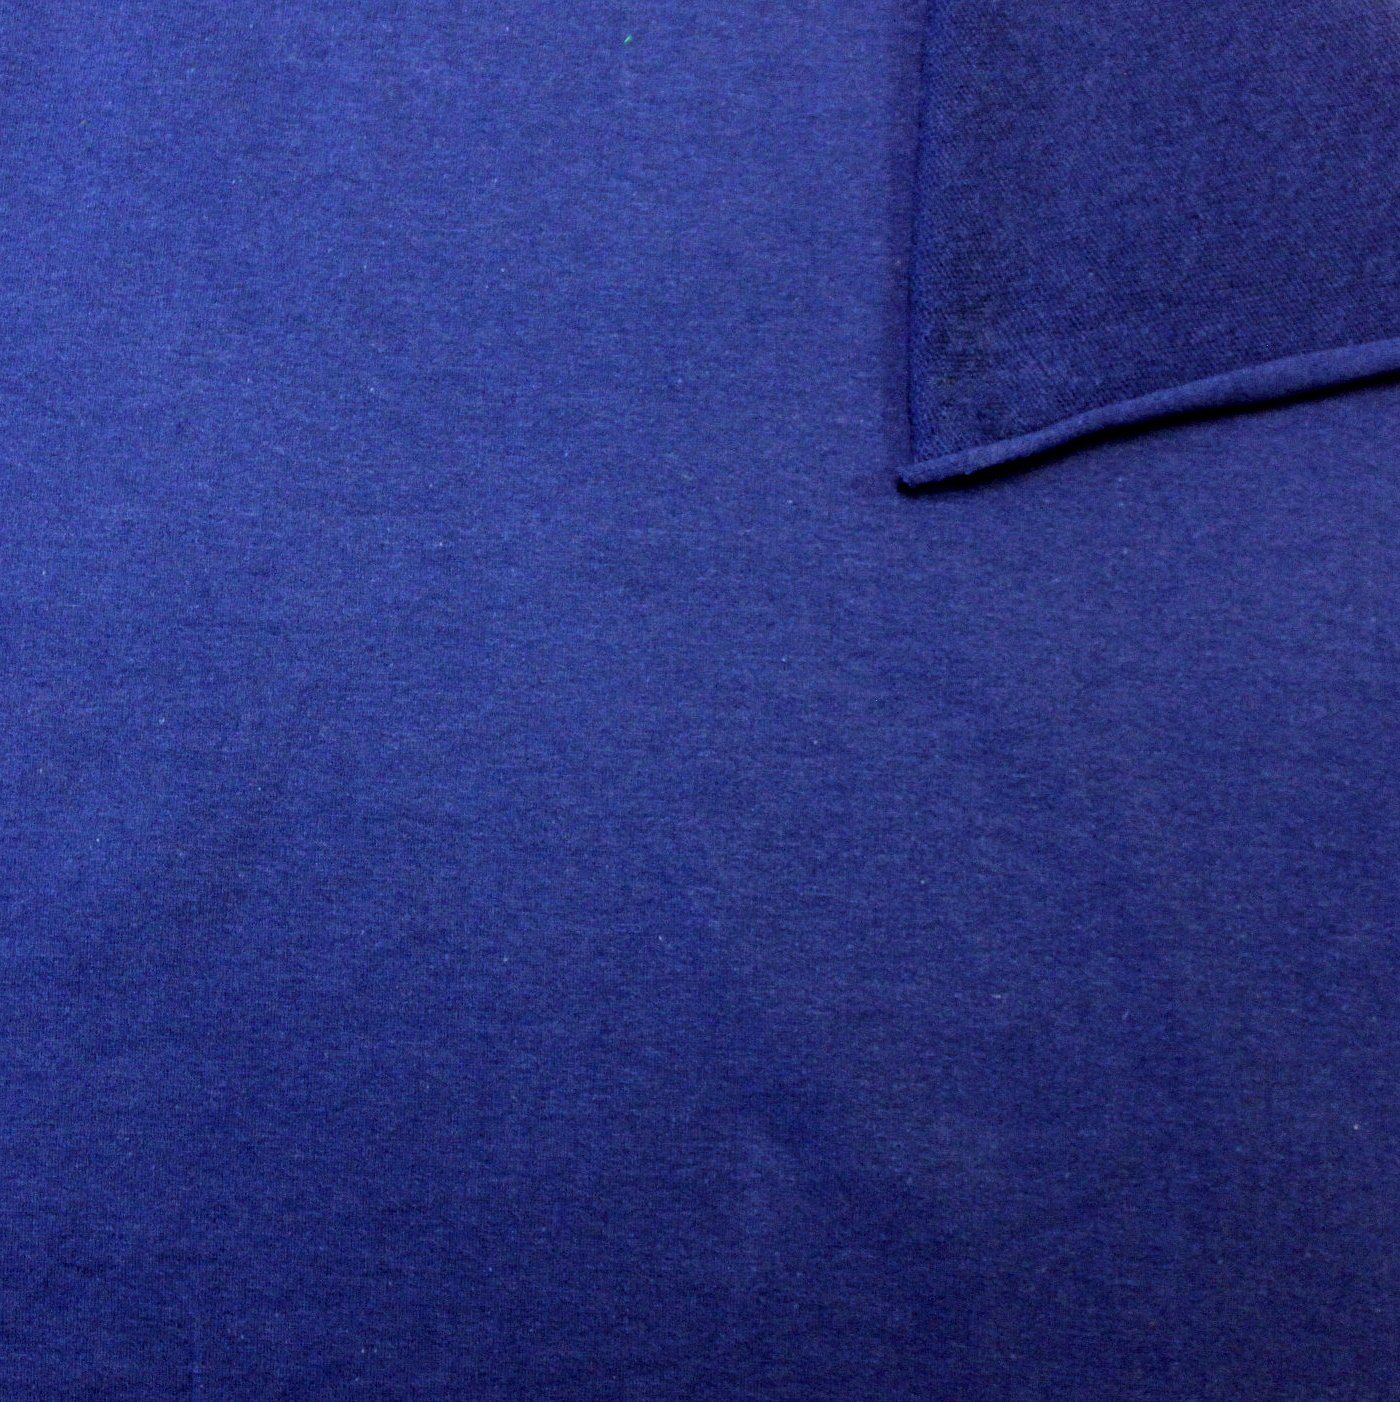 Vintage Cornflower Blue Terry Cloth Fabric // 18 Long X 66 Around Unused  Looped Pile, Stretch Knit -  Canada